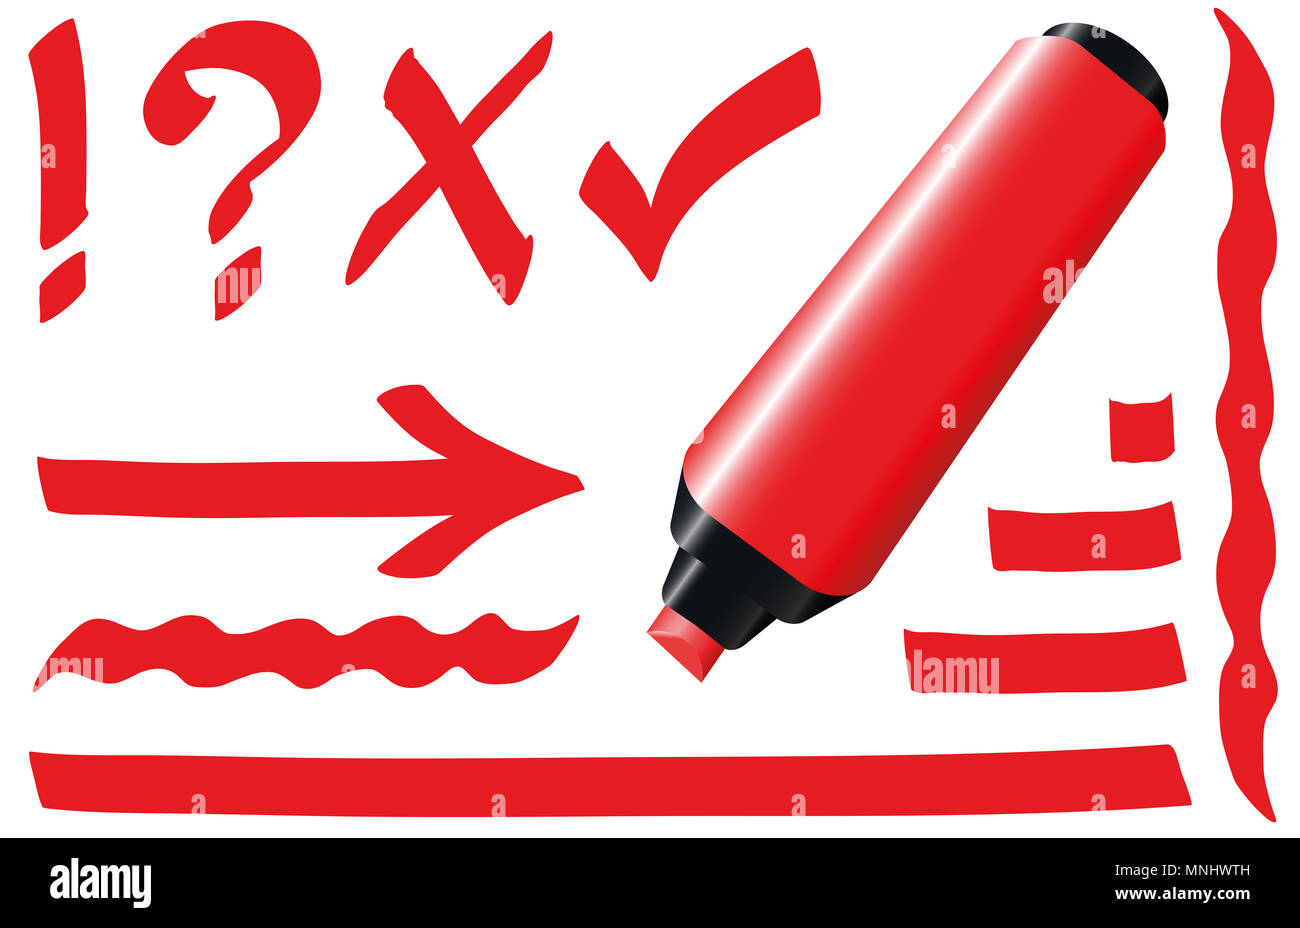 Red highlighter. Bright red marker pen plus strokes and signs like call sign, question mark, tick mark and arrow. Stock Photo